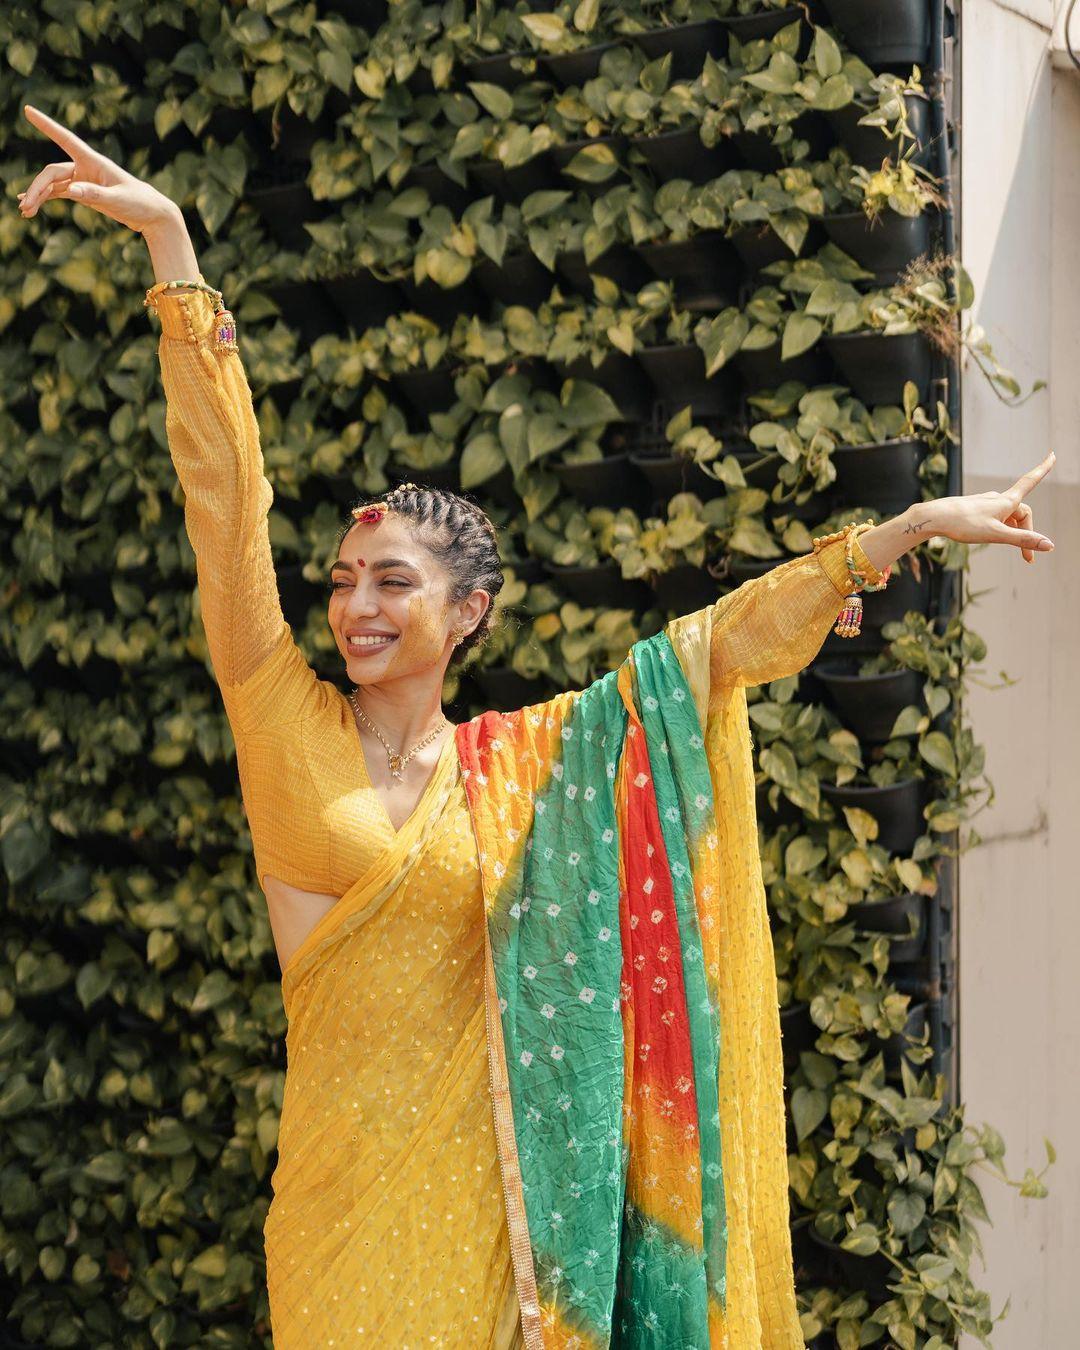 The actress was dressed in a yellow saree and paired with a stunning baandhni dupatta, and she looked all ready and happy for the haldi and snaathakam ceremony. Her whole appearance was made more elegant by the elaborate motifs on her saree and the dupatta itself 